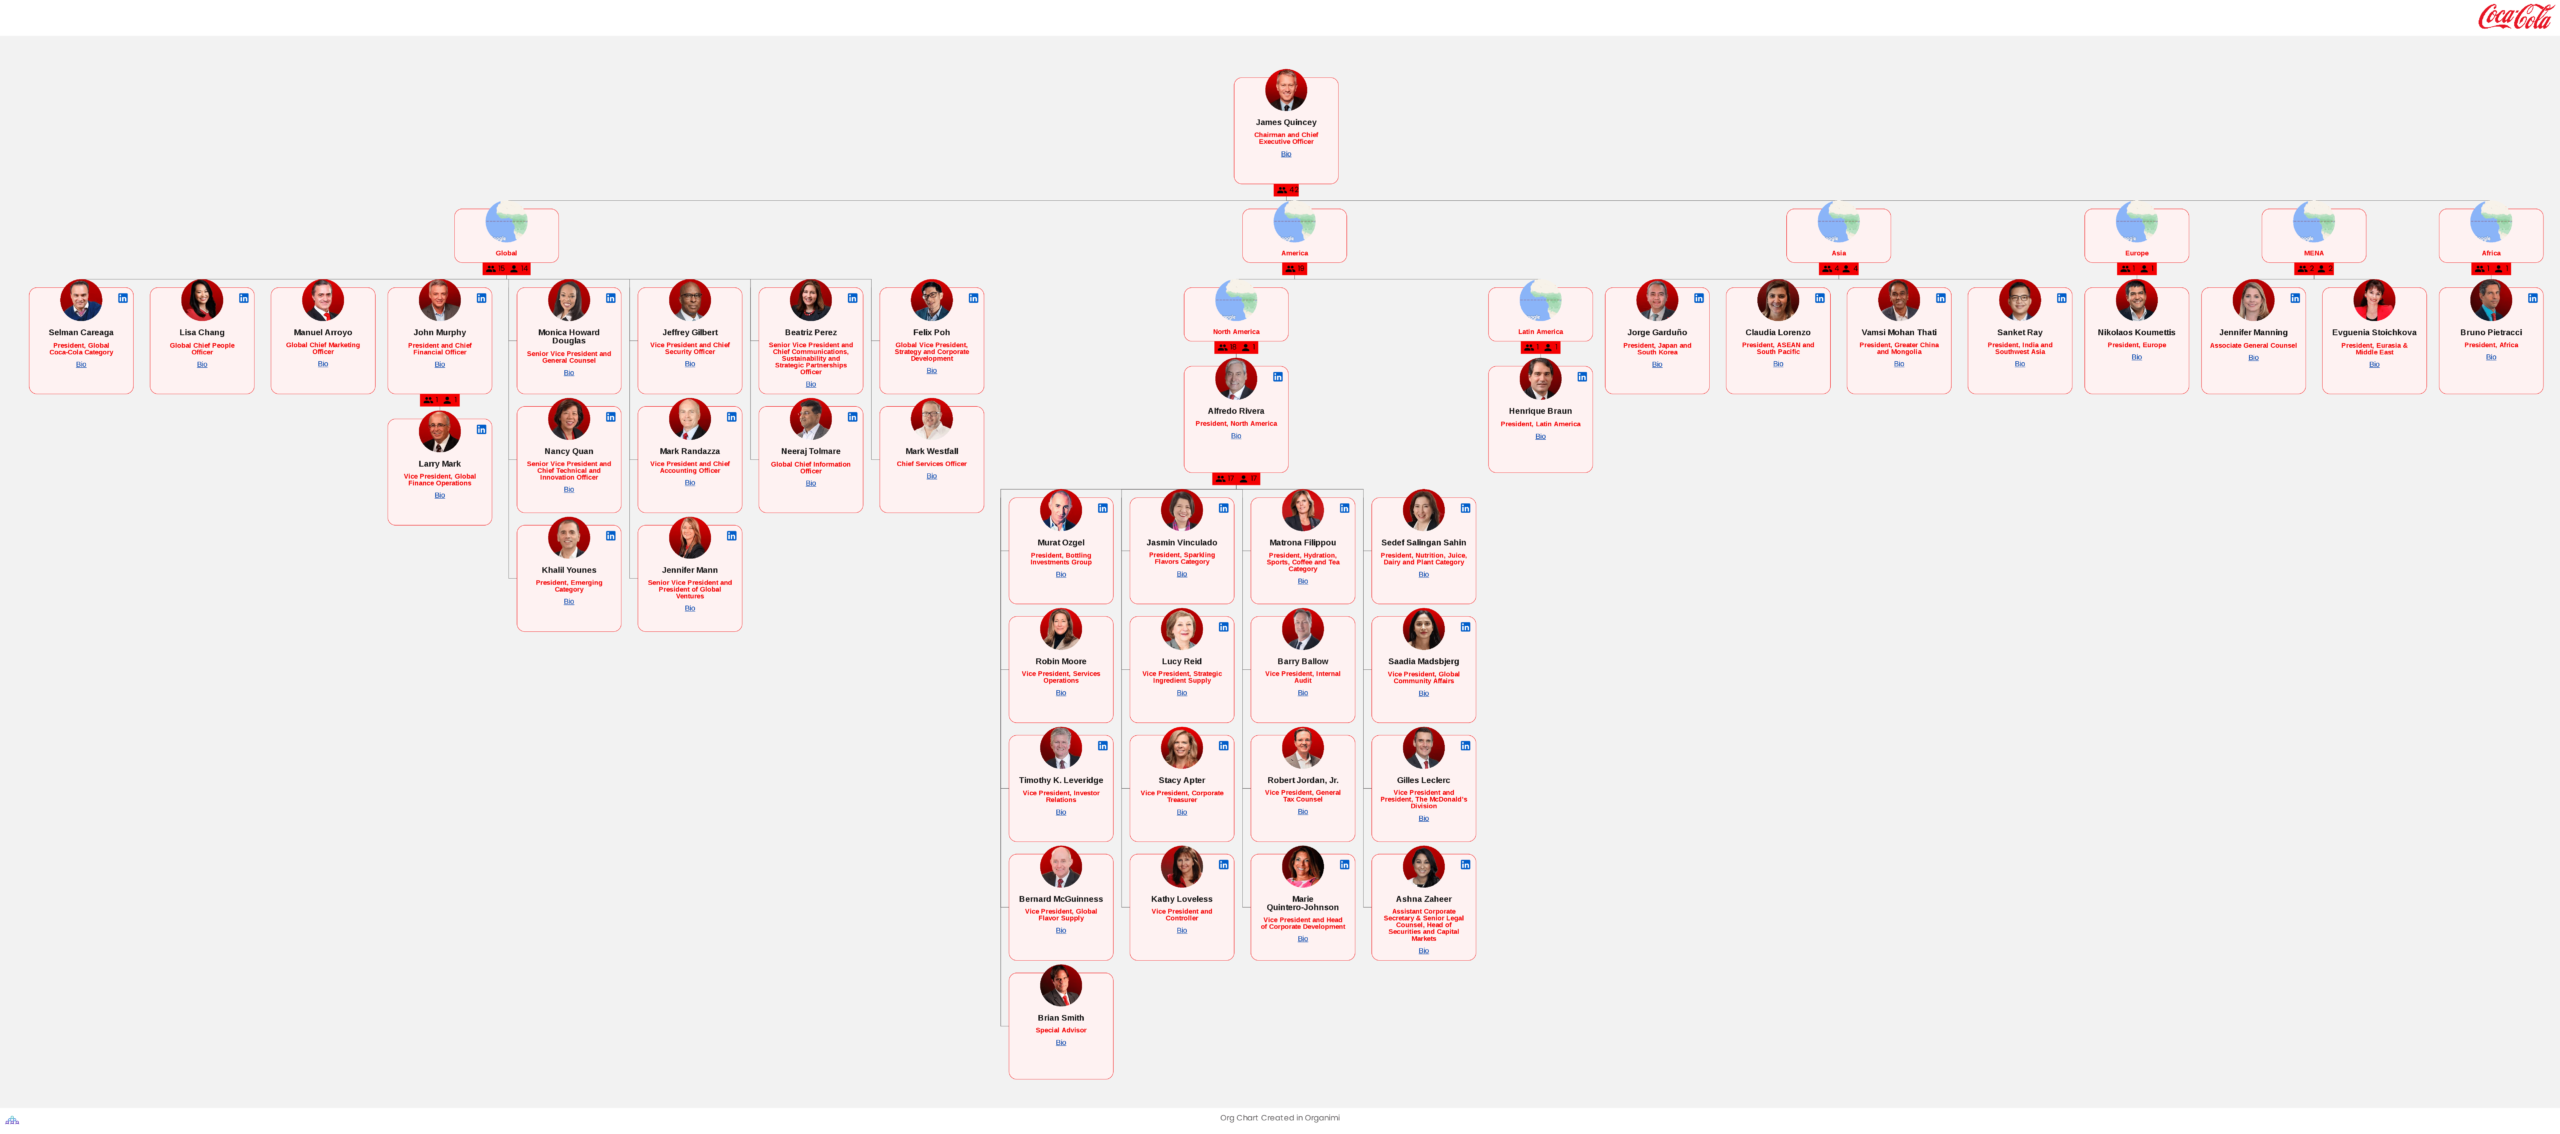 The Coca-Cola Company's Organizational Structure Org Chart